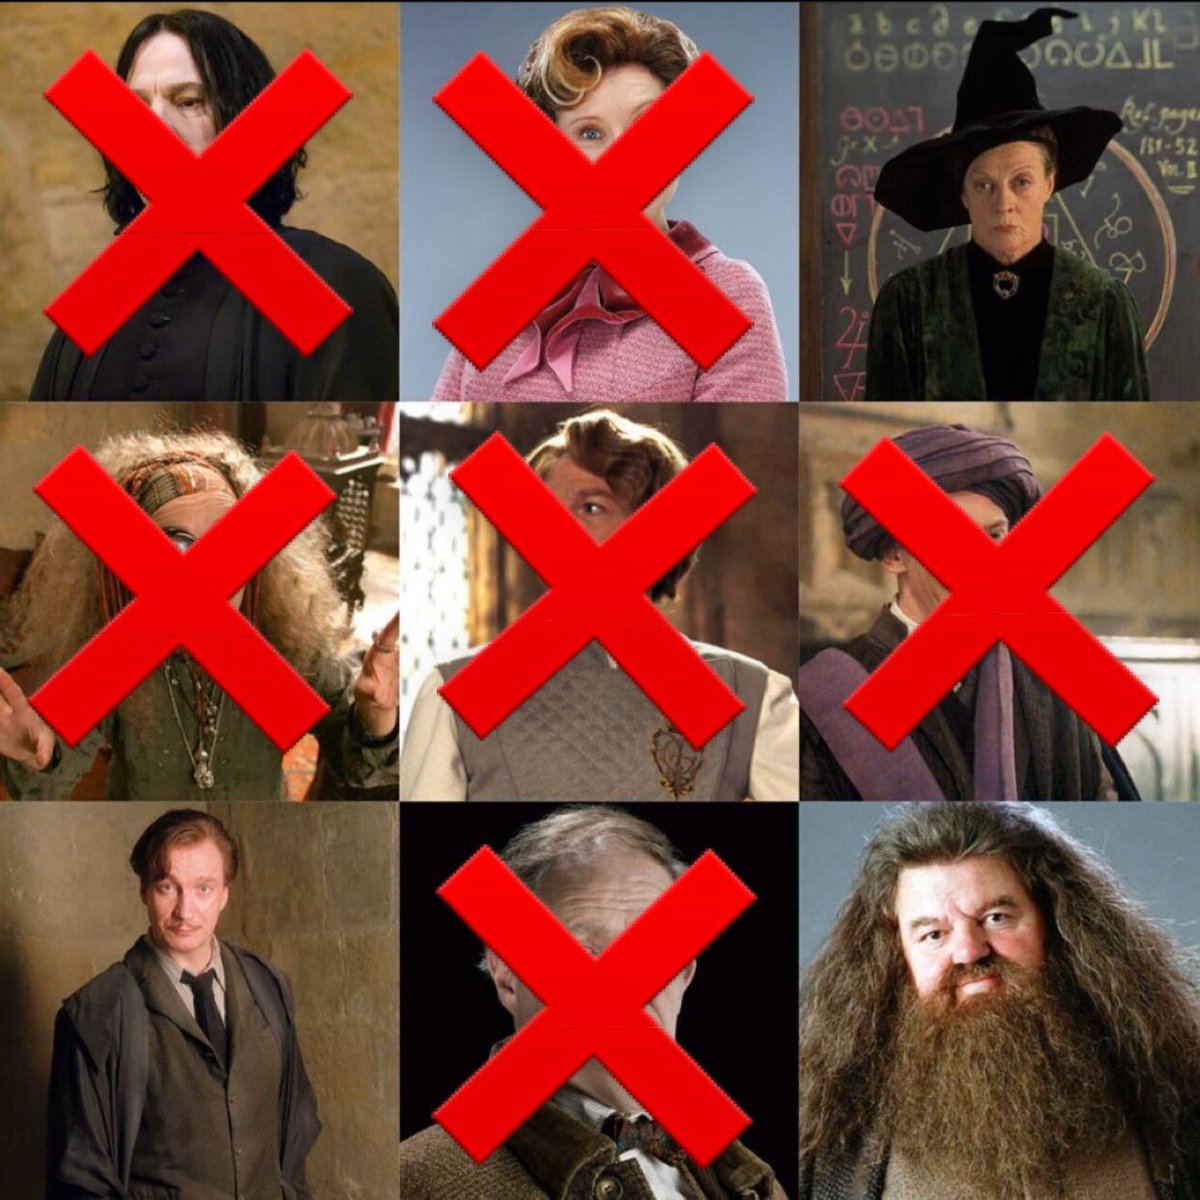 McGonagall, Lupin, and Hagrid are all that remain.It’s very hard to decide who your least favorite is amongst these three, but we must finish the game!Reply to this tweet with your LEAST favorite professor. The one who is mentioned the most in the replies will be eliminated.